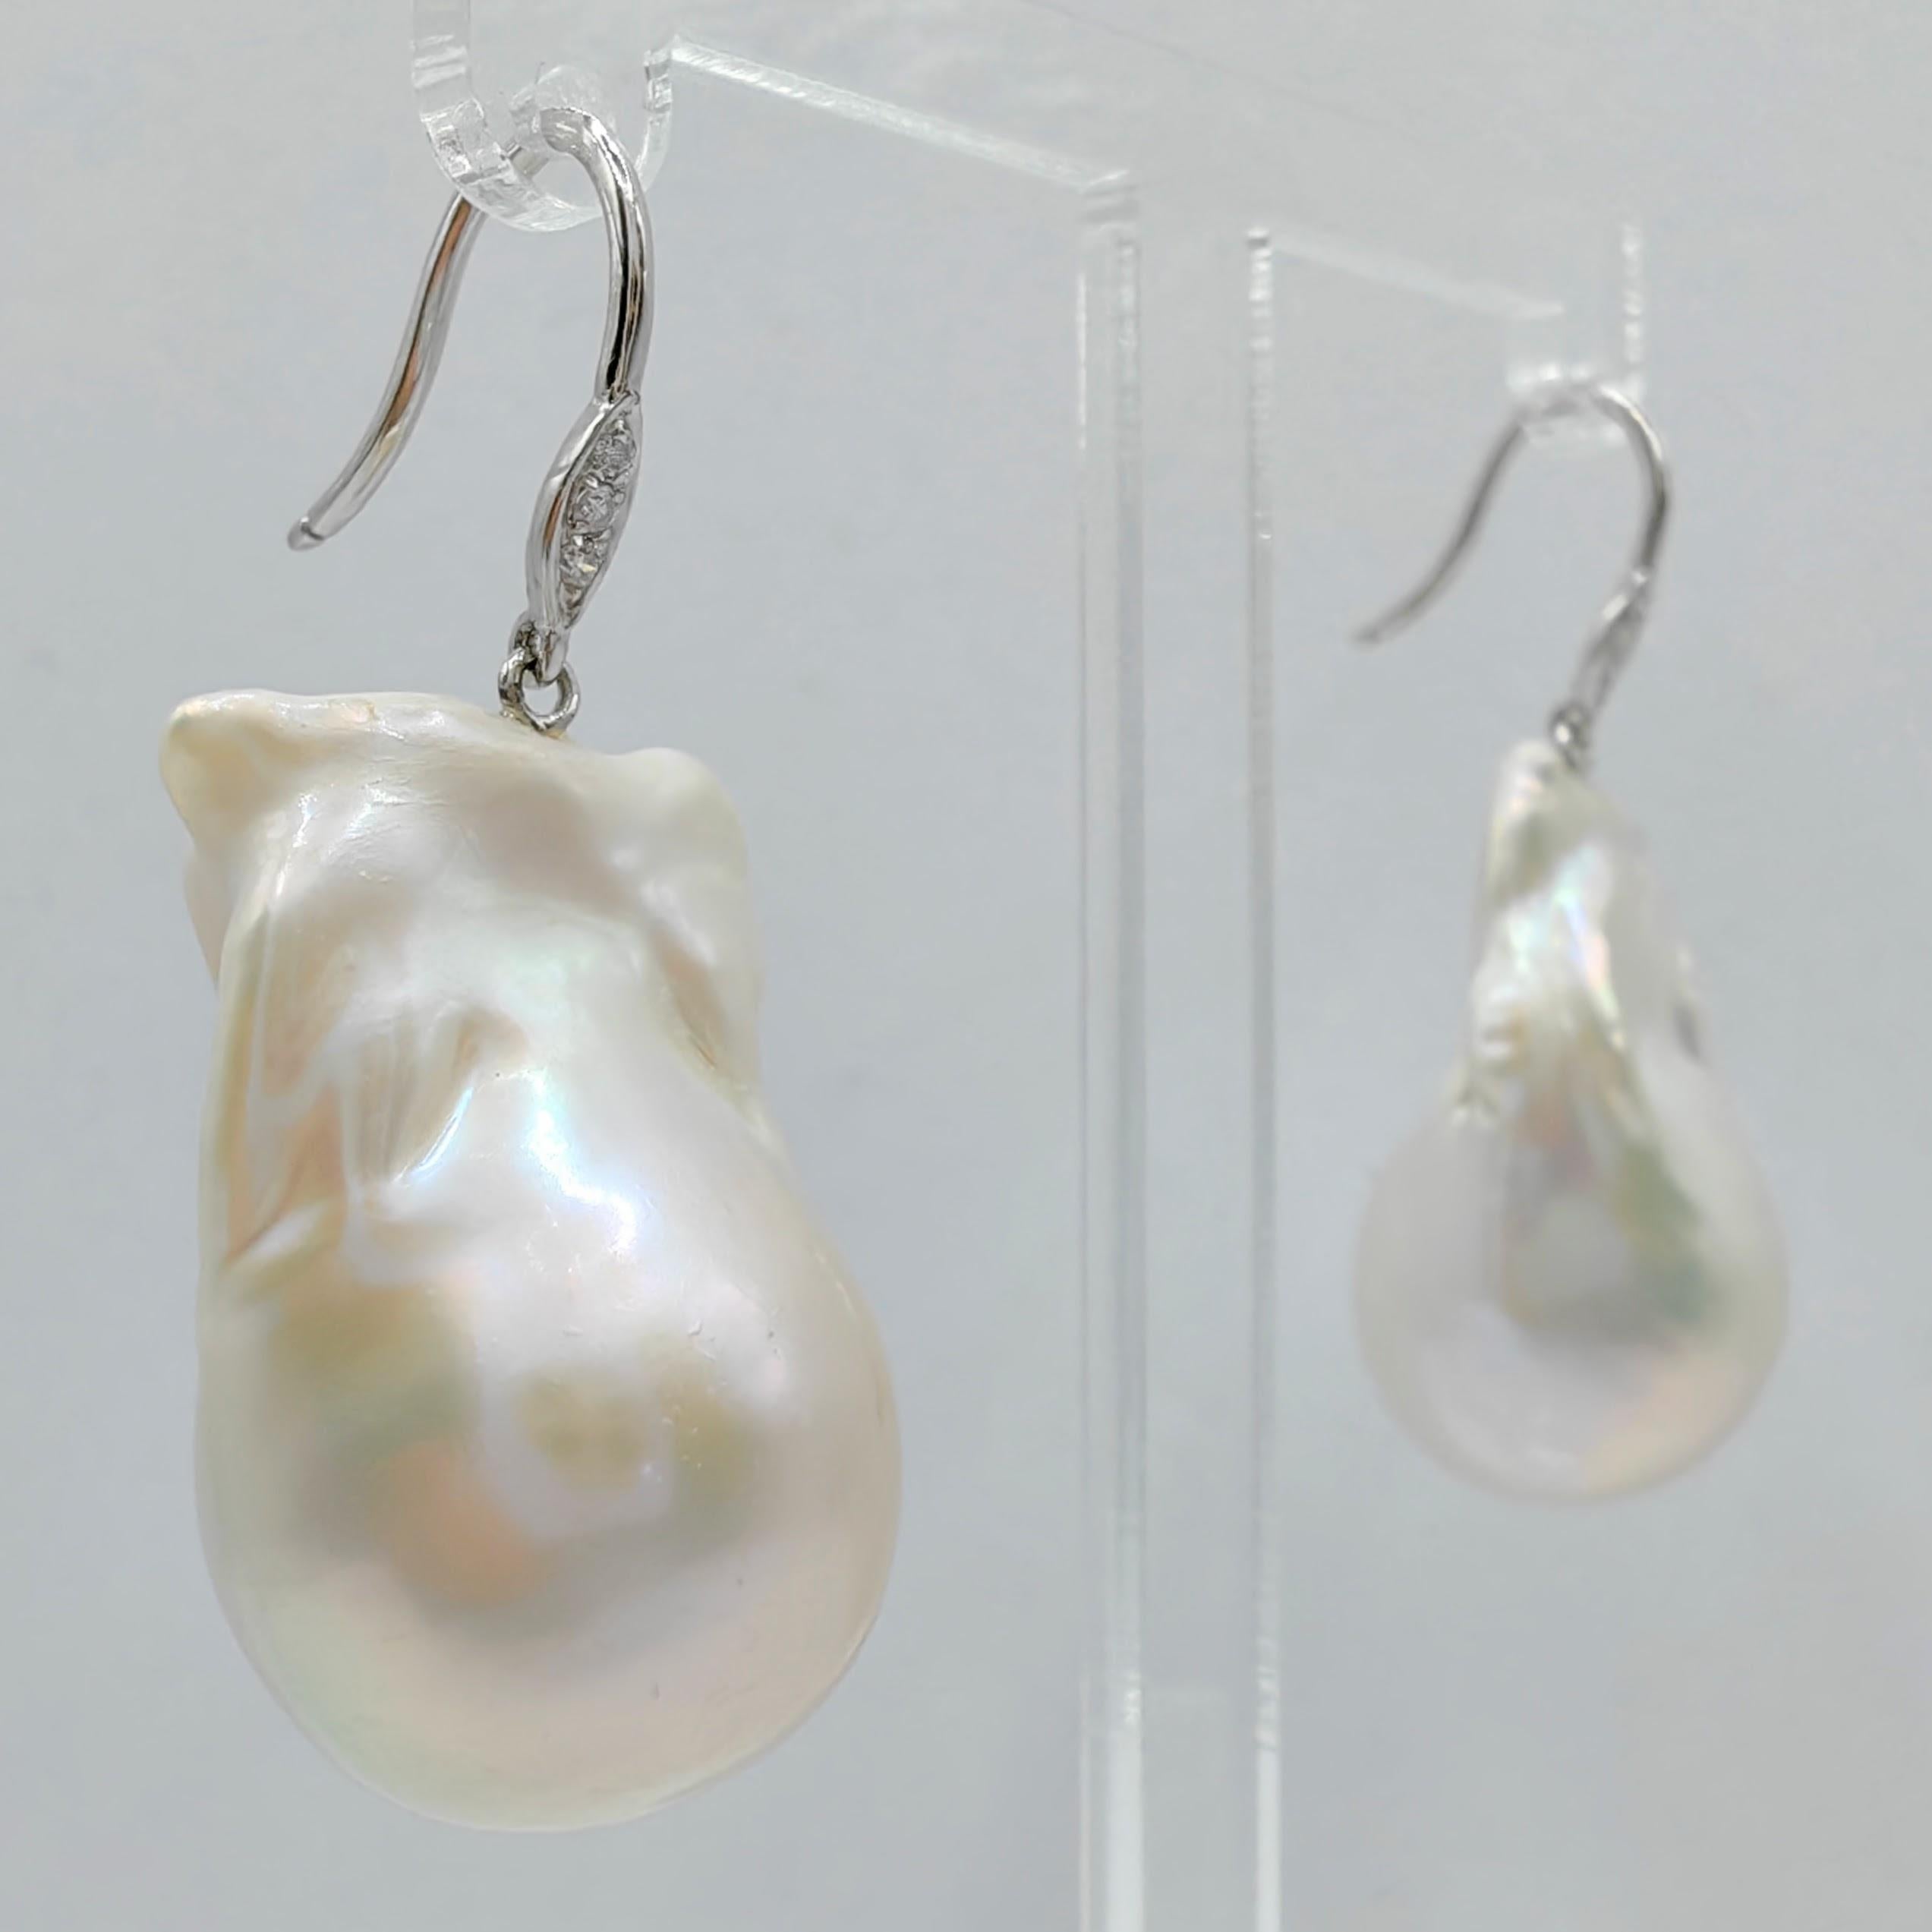 Uncut Baroque Pearl Diamond Dangling Drop Earrings With 18K White Gold French Hooks